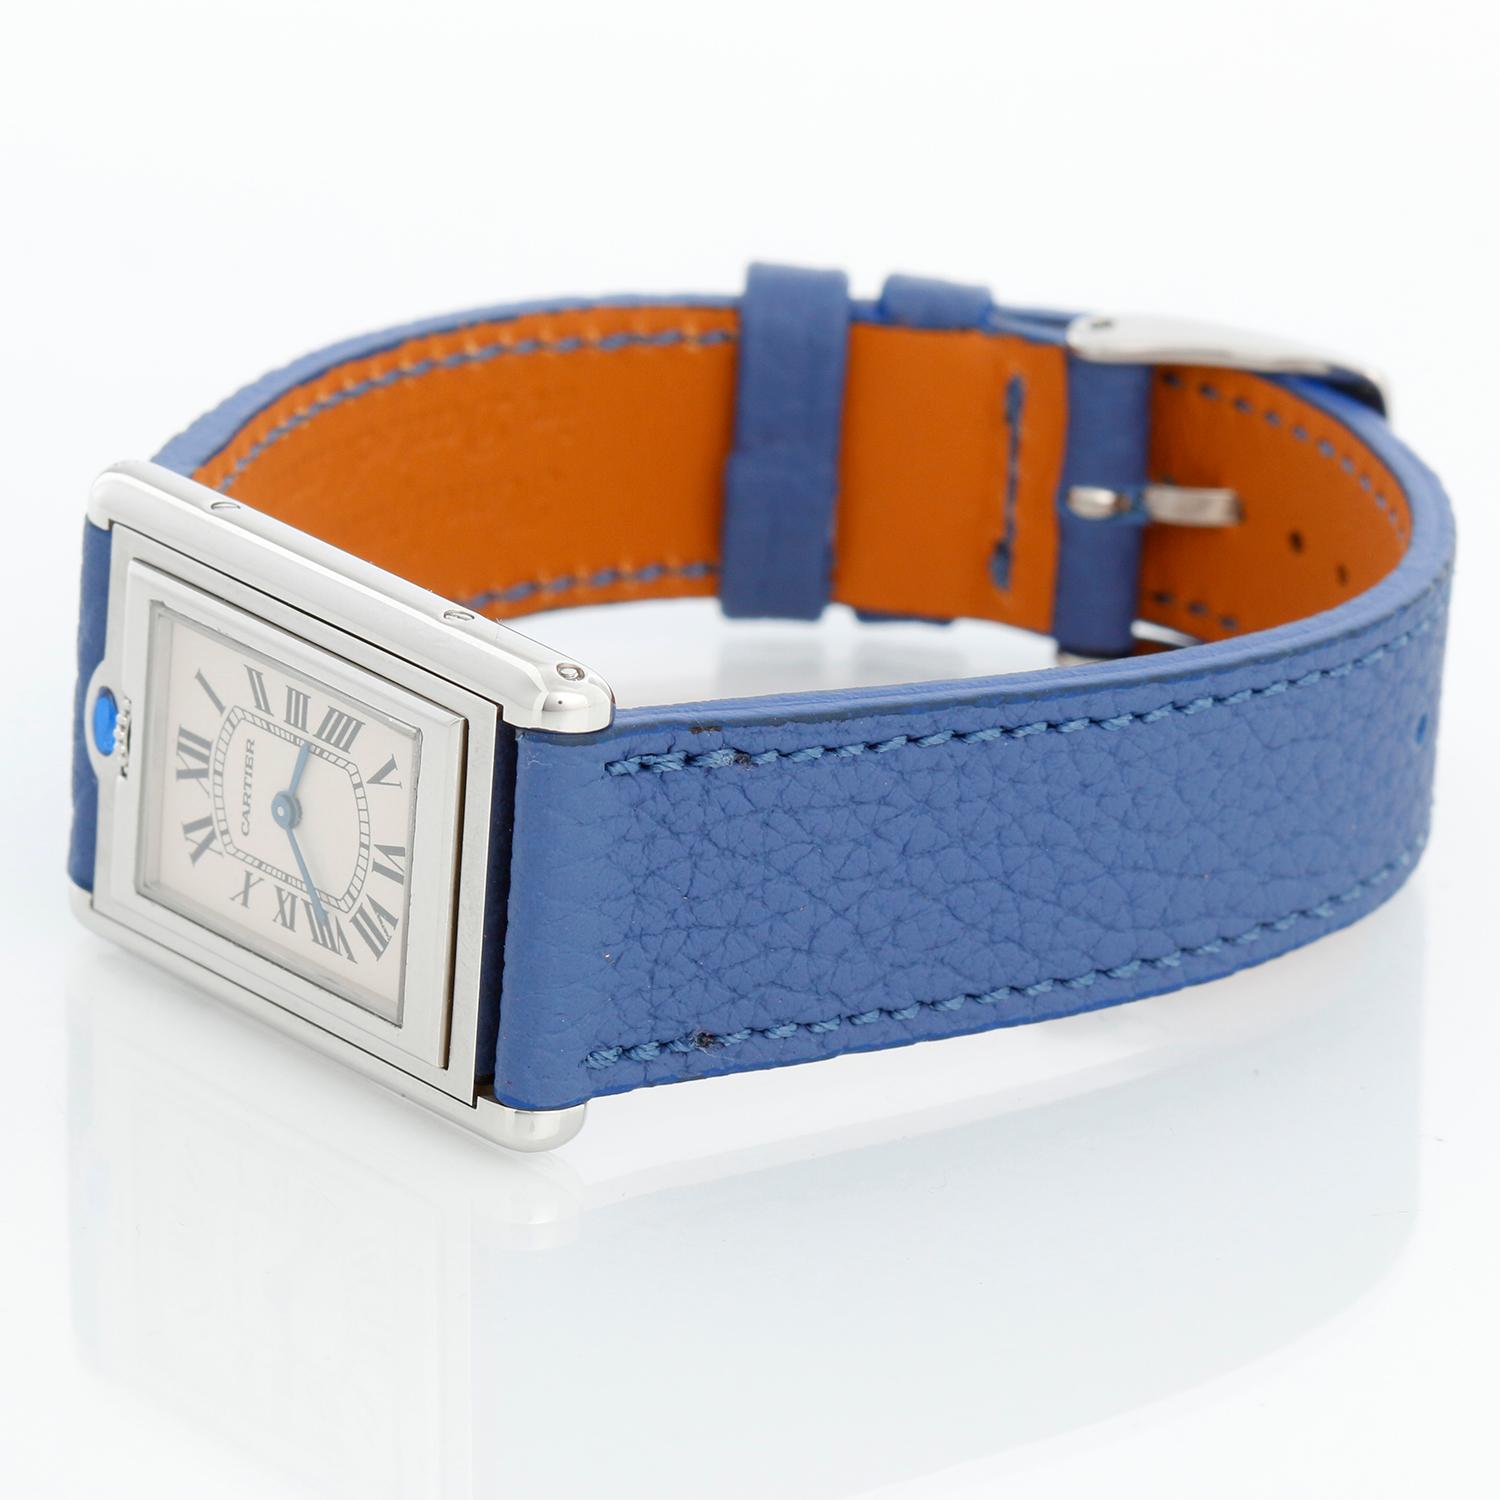 Cartier Tank Basculante Watch Ref 2405 Ladies - Quartz. Stainless steel case ( 24 mm x 36 mm ). Silver dial with Roman numerals. Blue strap with tang buckle . Pre-owned with custom box.